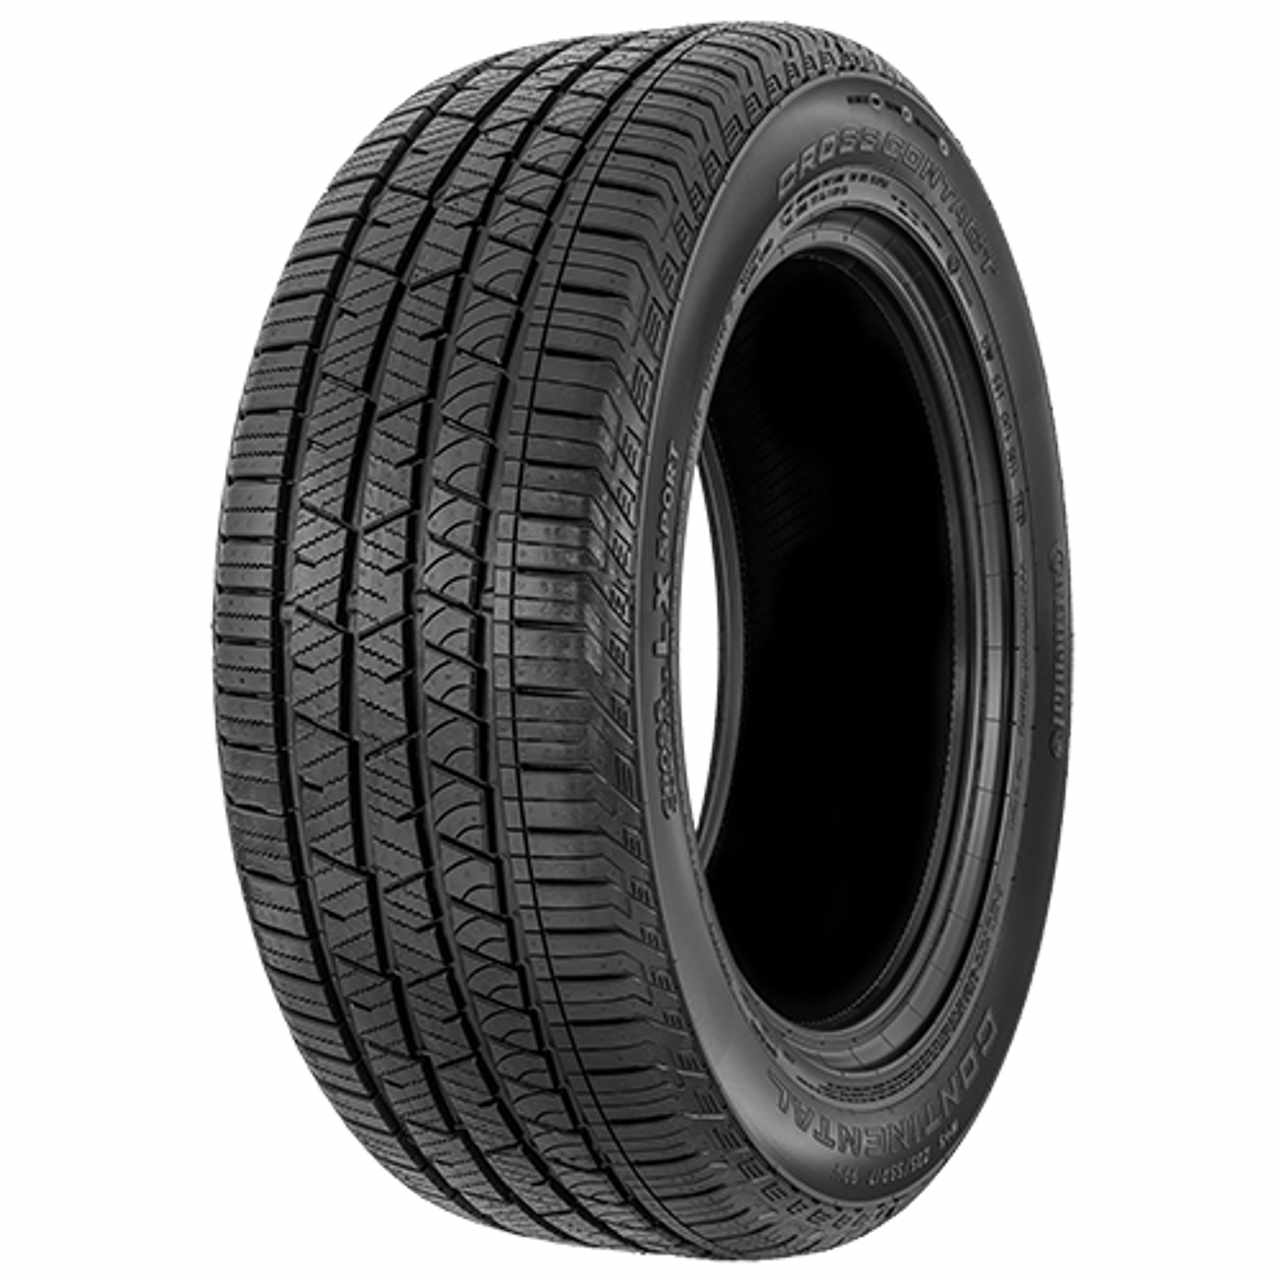 CONTINENTAL CROSSCONTACT LX SPORT (T1) (EVc) 265/45R20 108V CONTISILENT FR BSW XL